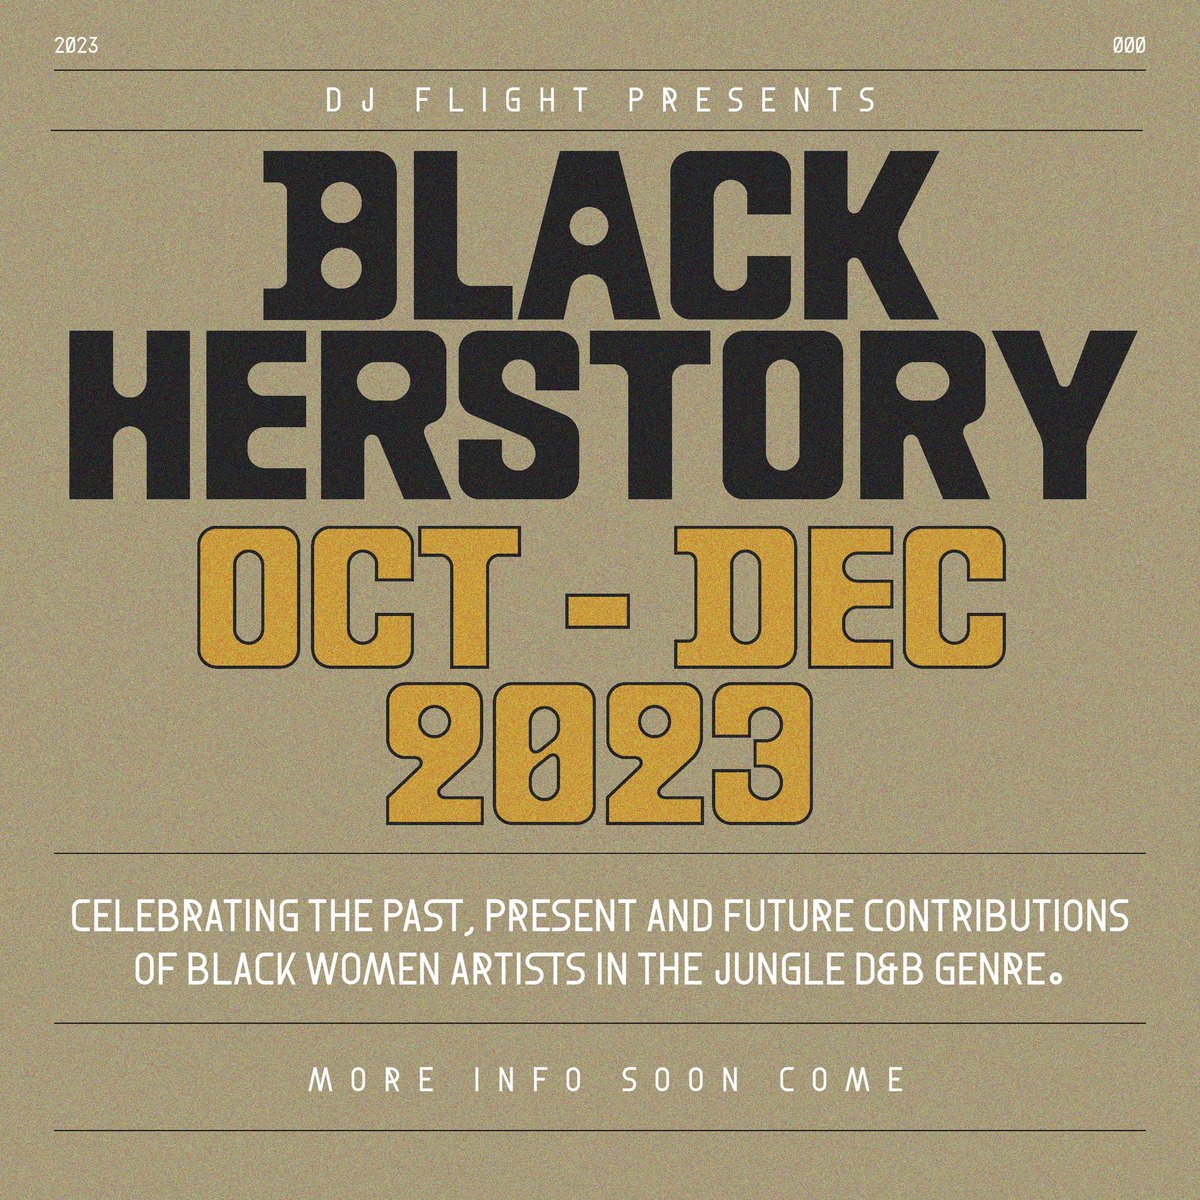 I am very proud to present once again: * BLACK HERSTORY * A specially curated run of events celebrating the past, present, future contributions of Black women artists in the Jungle D&B genre. London • Sheffield • Bristol • Leeds • More TBA Full info soon >>